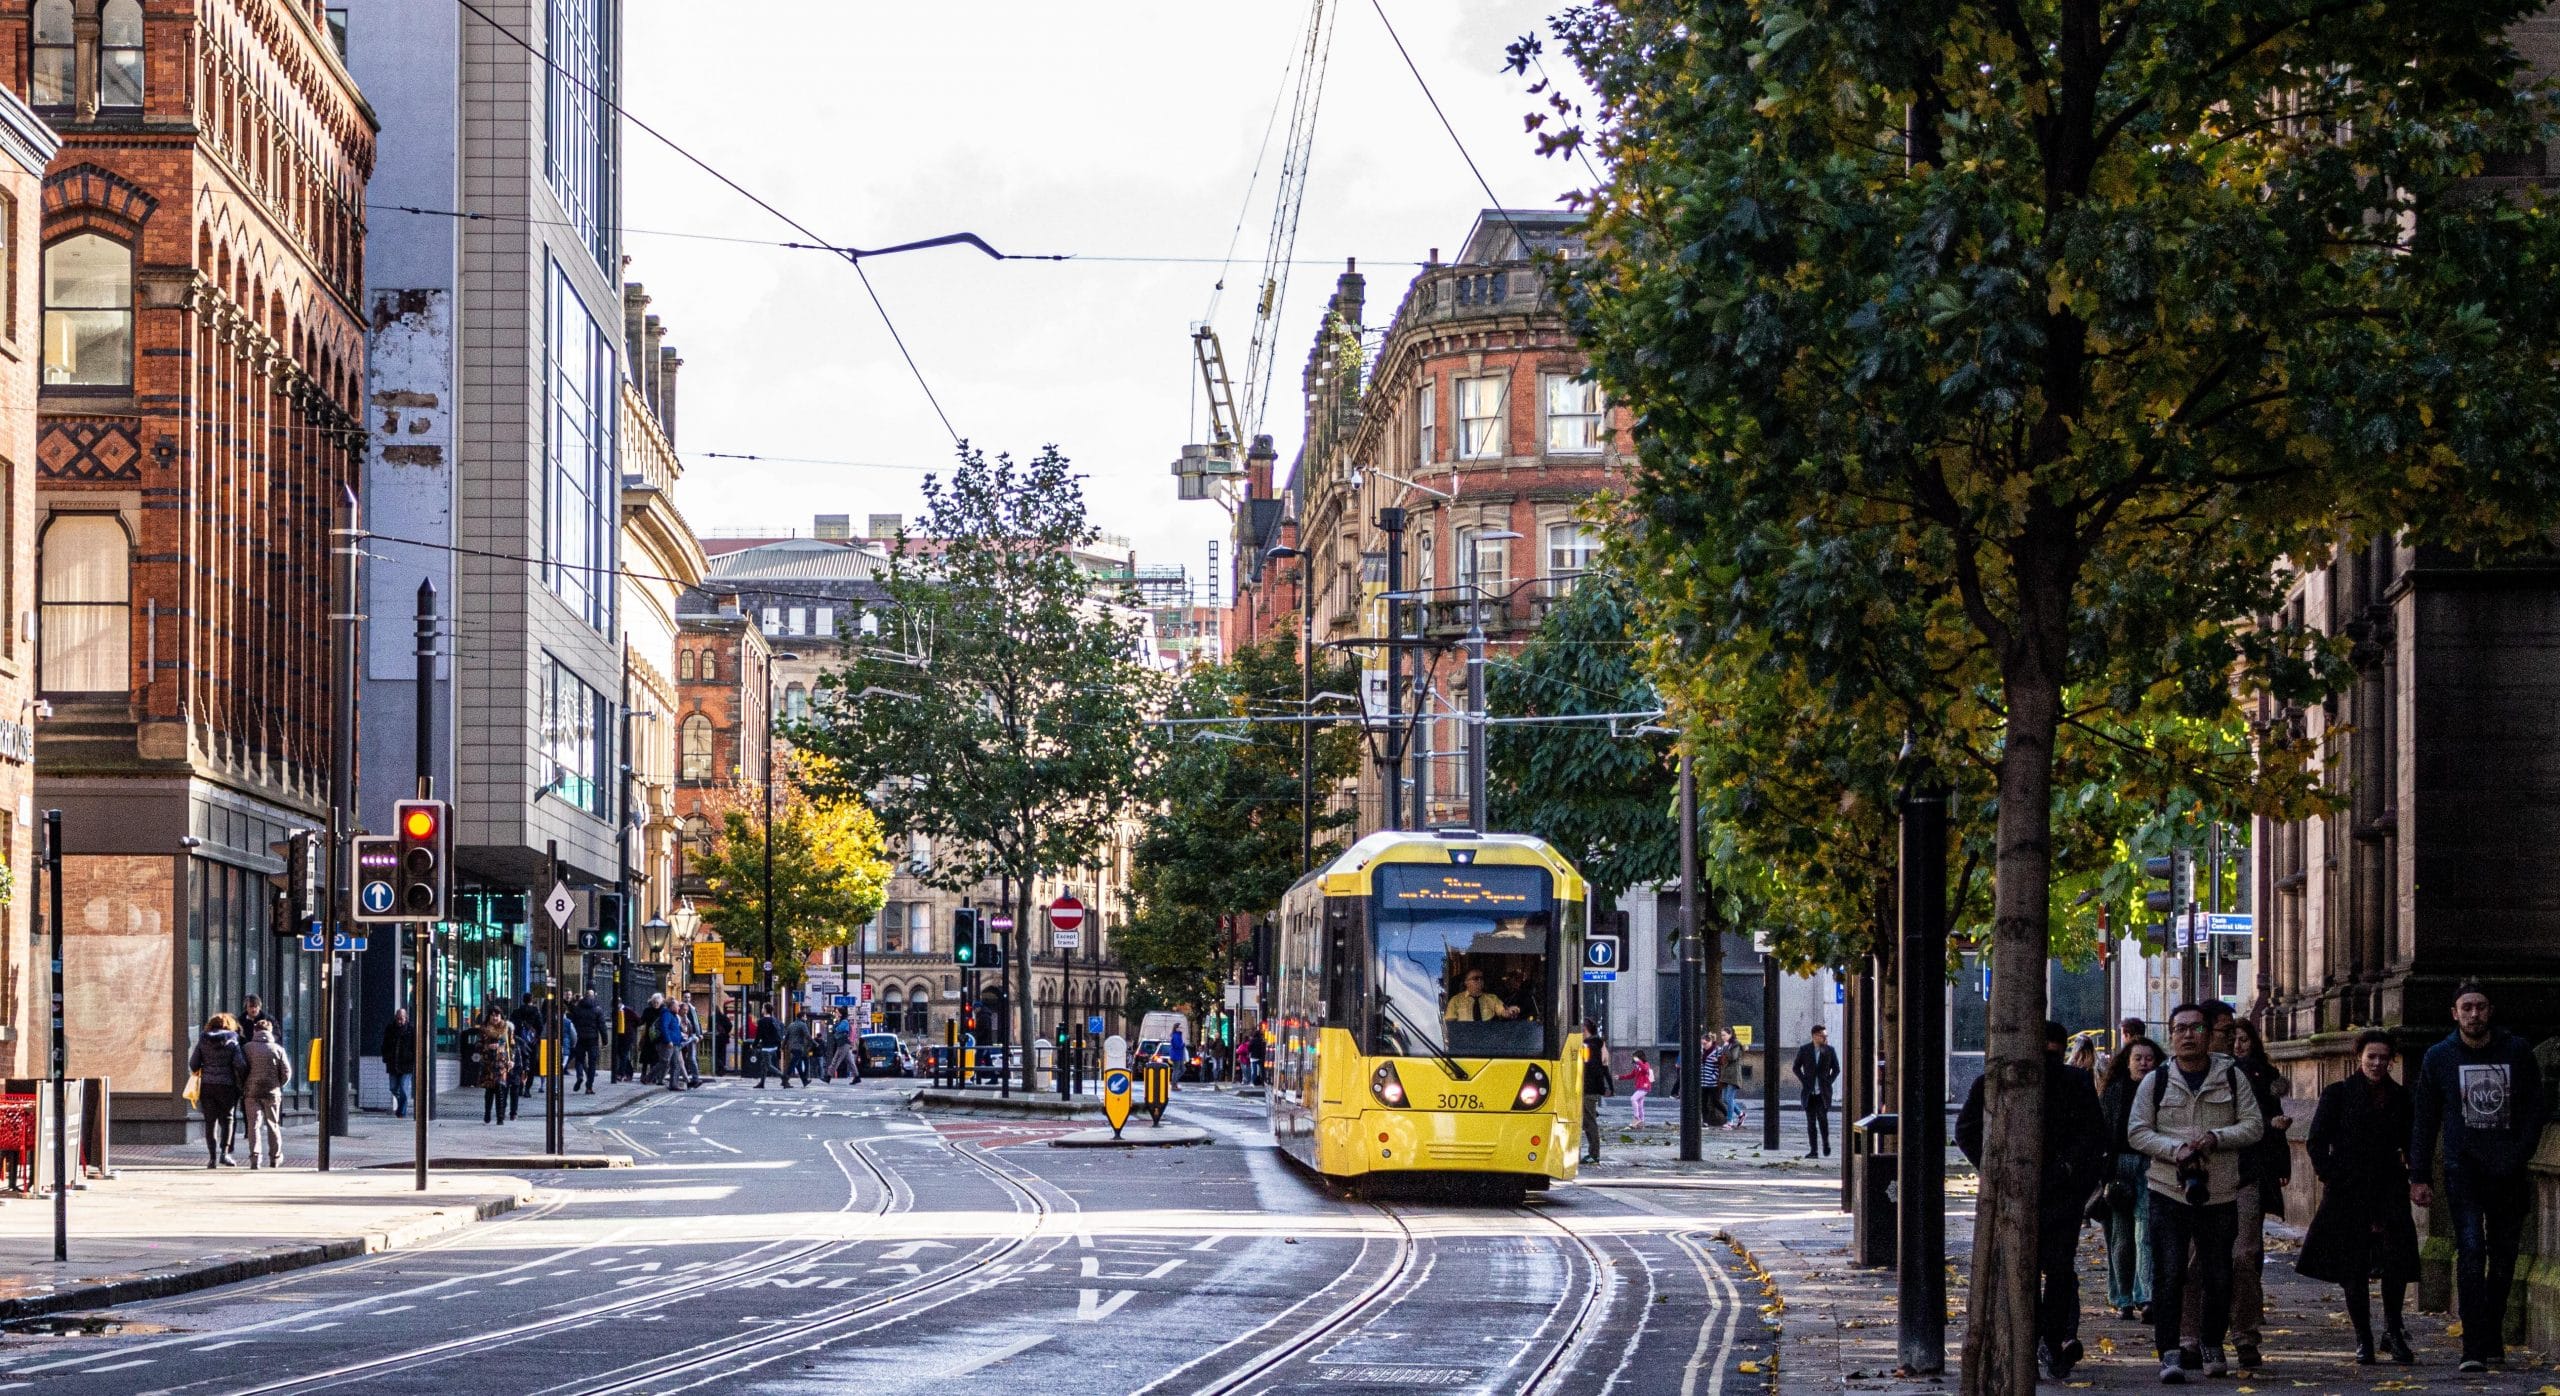 A tram in Manchester city centre on a cloudy day with pedestrians walking down a tree lined street.